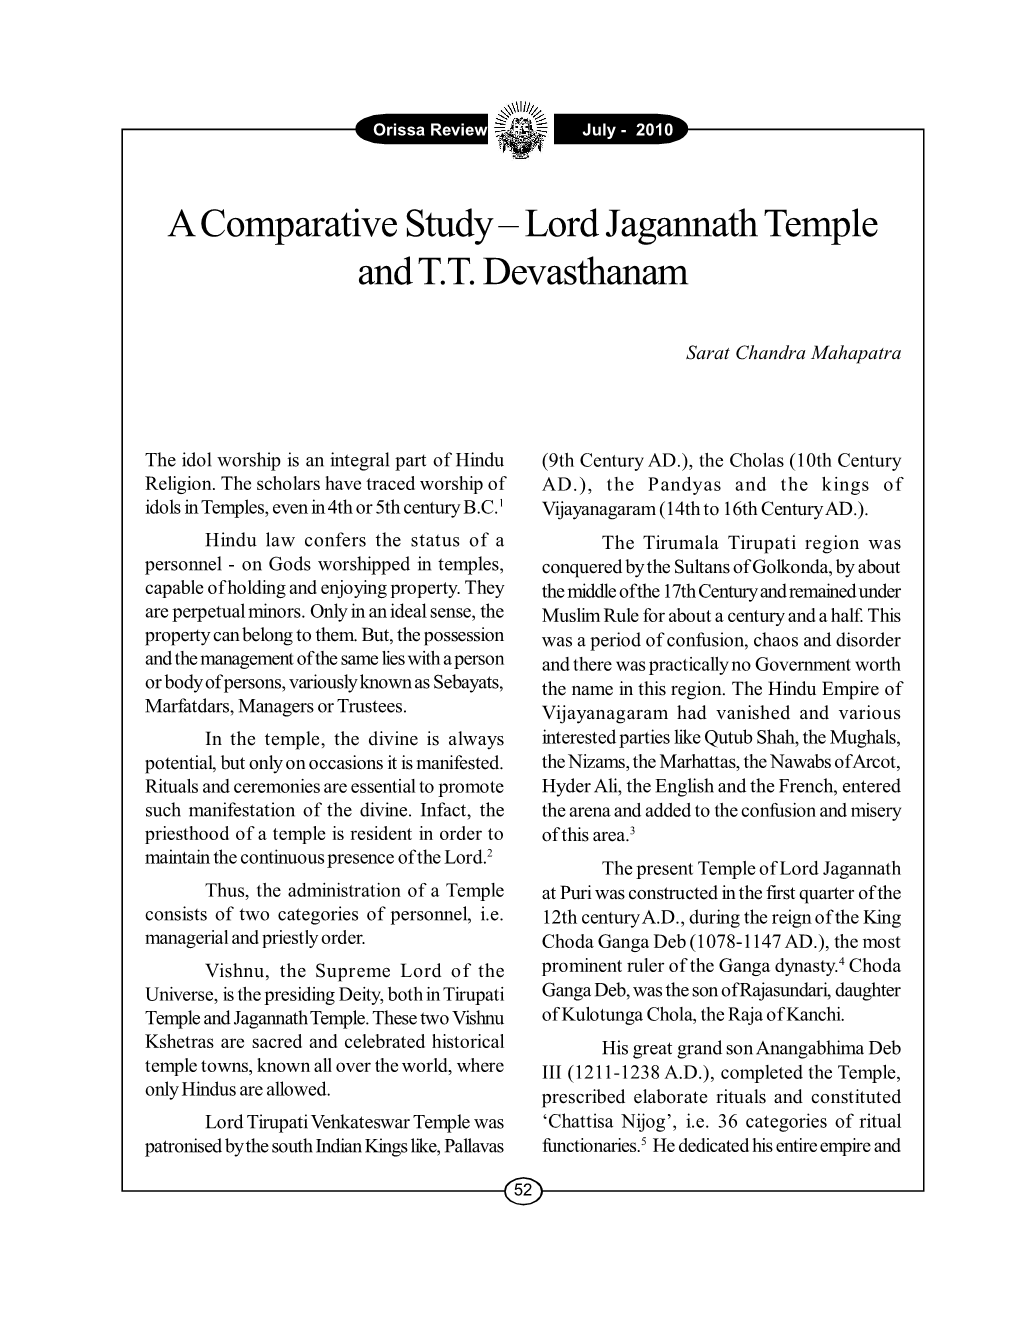 A Comparative Study – Lord Jagannath Temple and T.T